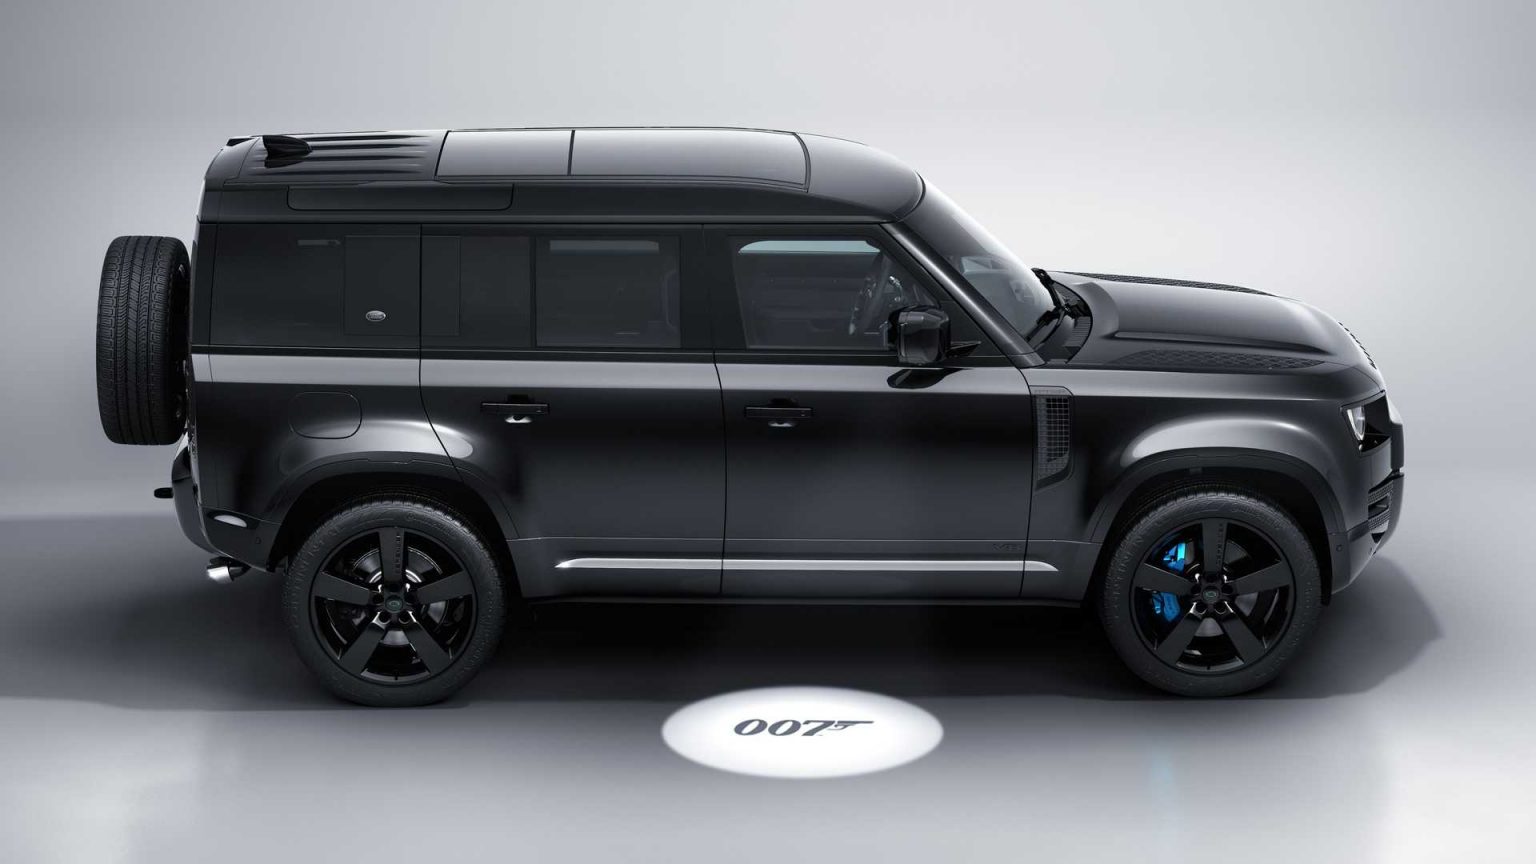 2020 Land Rover Defender To Be Revealed In September | AutoMoto Tale